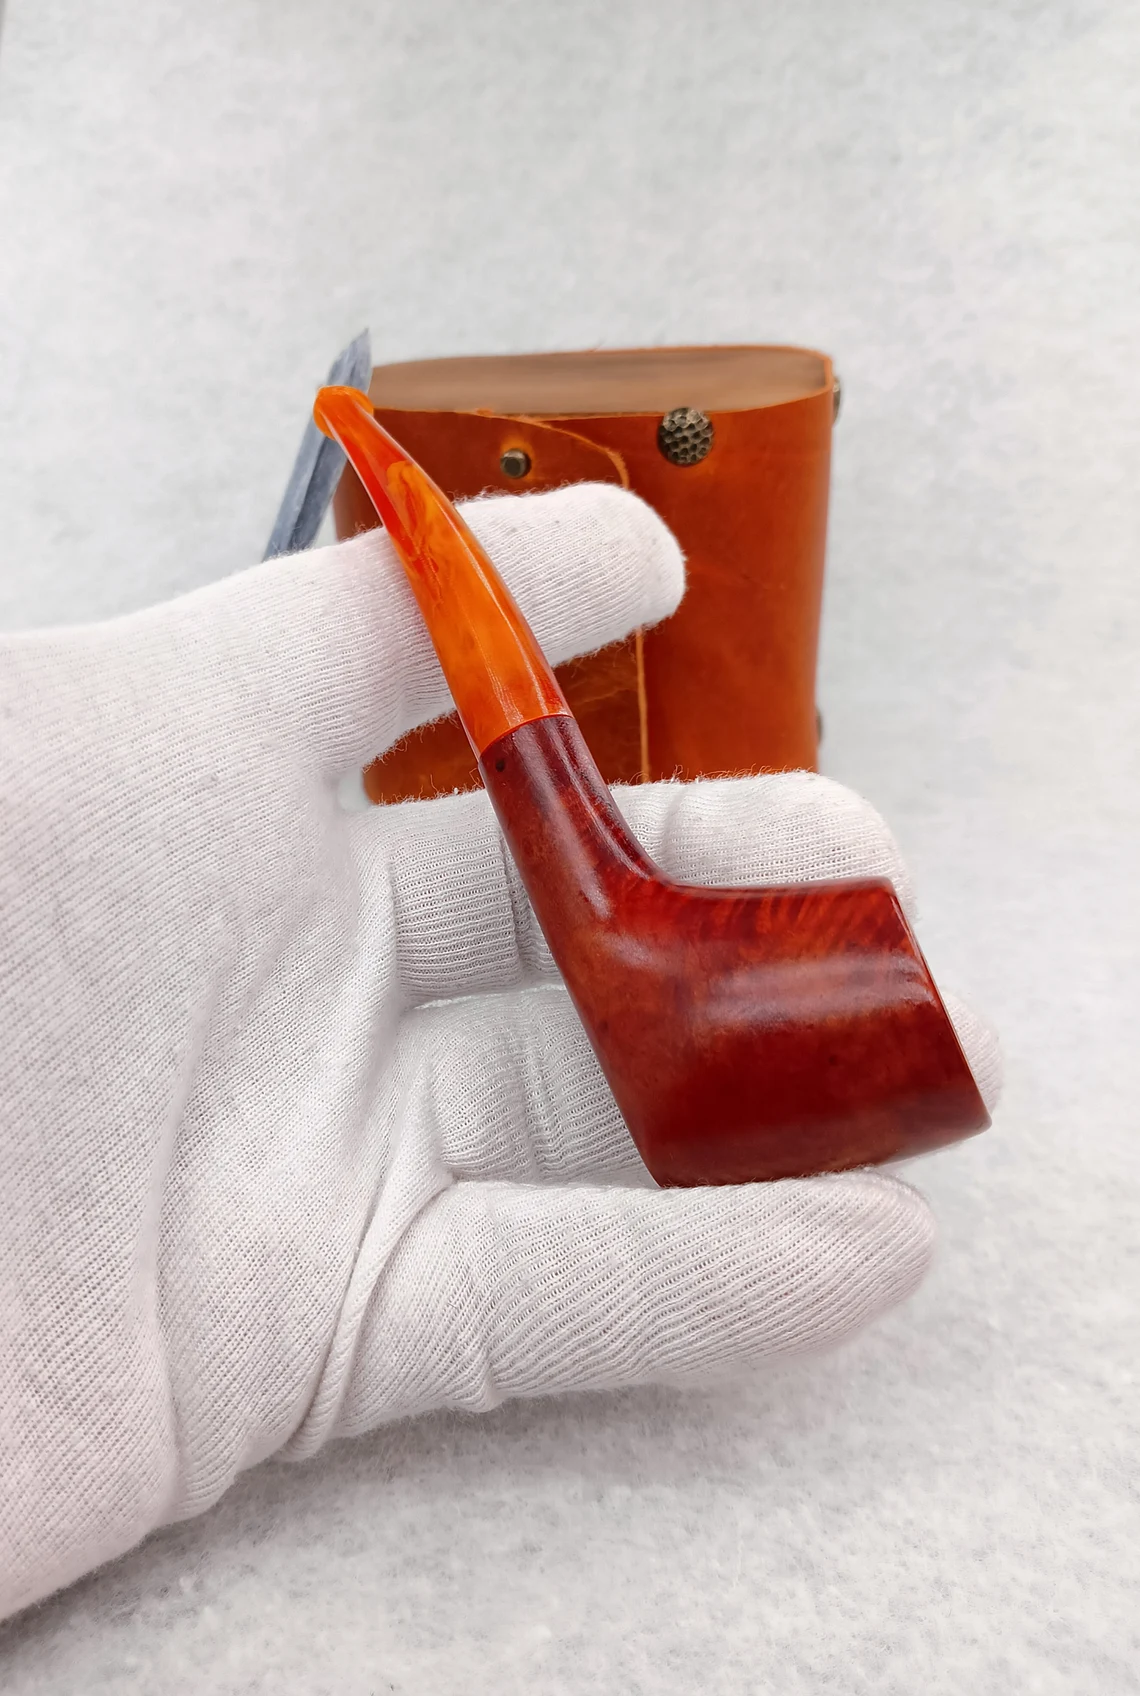 The Ultimate Guide to Buying Briar Pipes: Everything You Need to Know